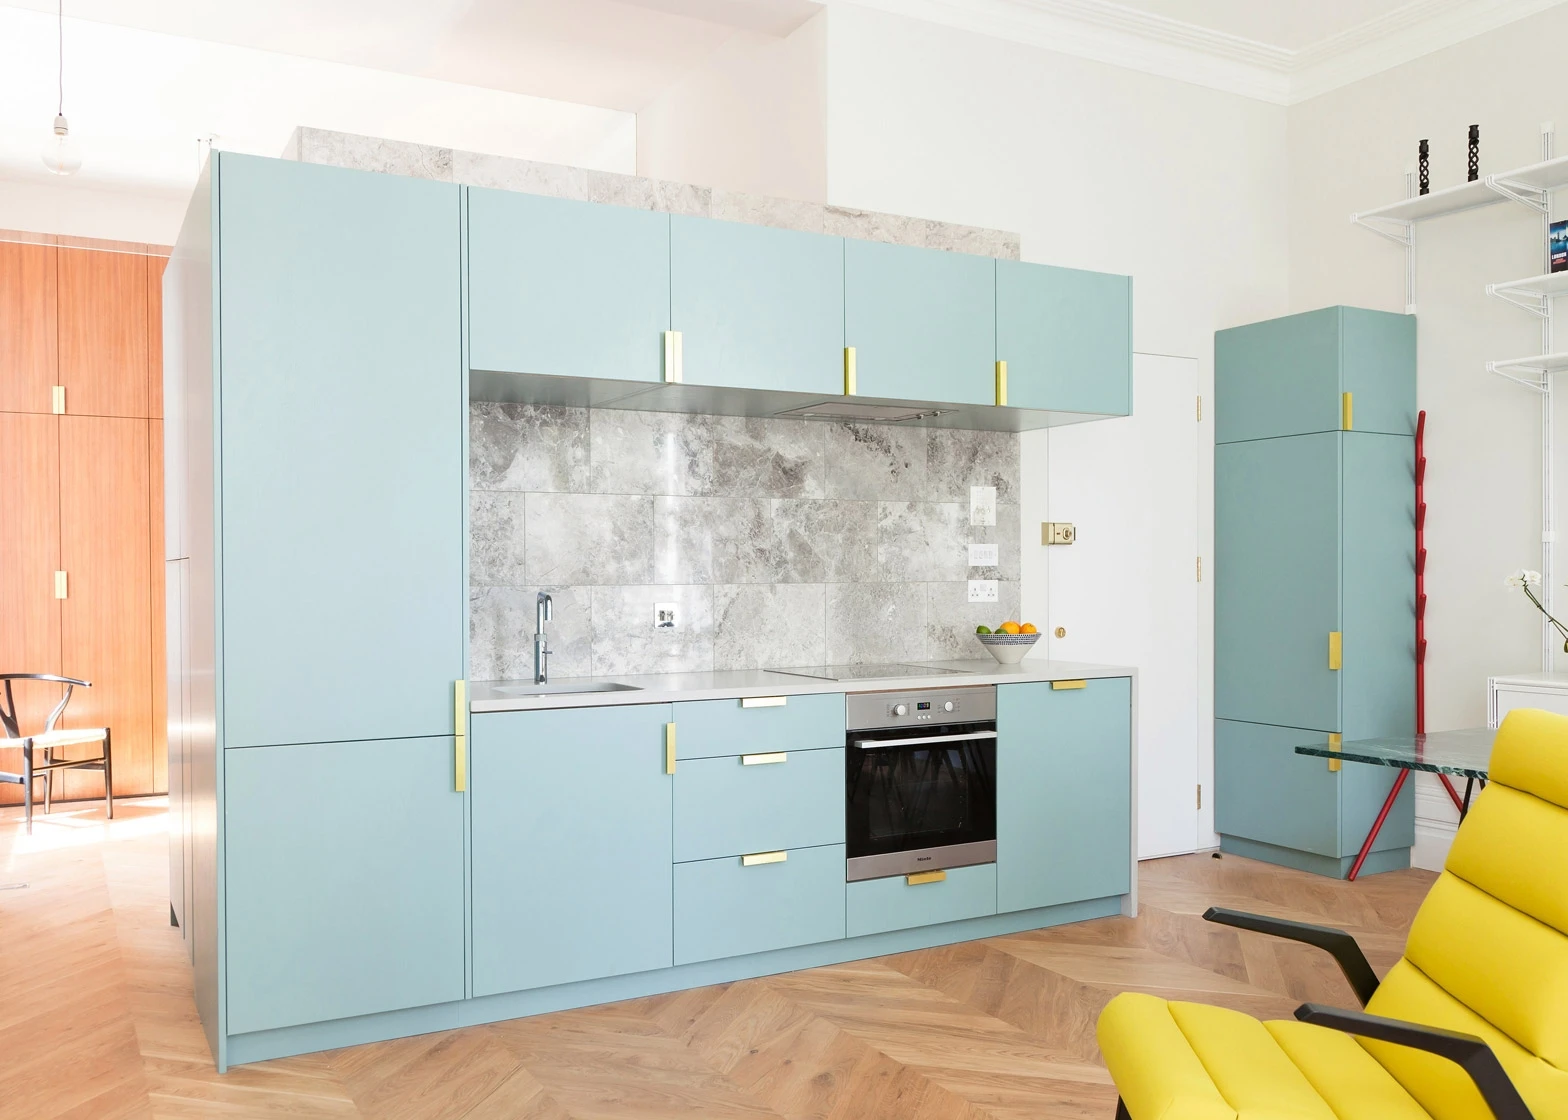 Blue doors with sleek handles with golden accents showcase the bespoke craftsmanship.